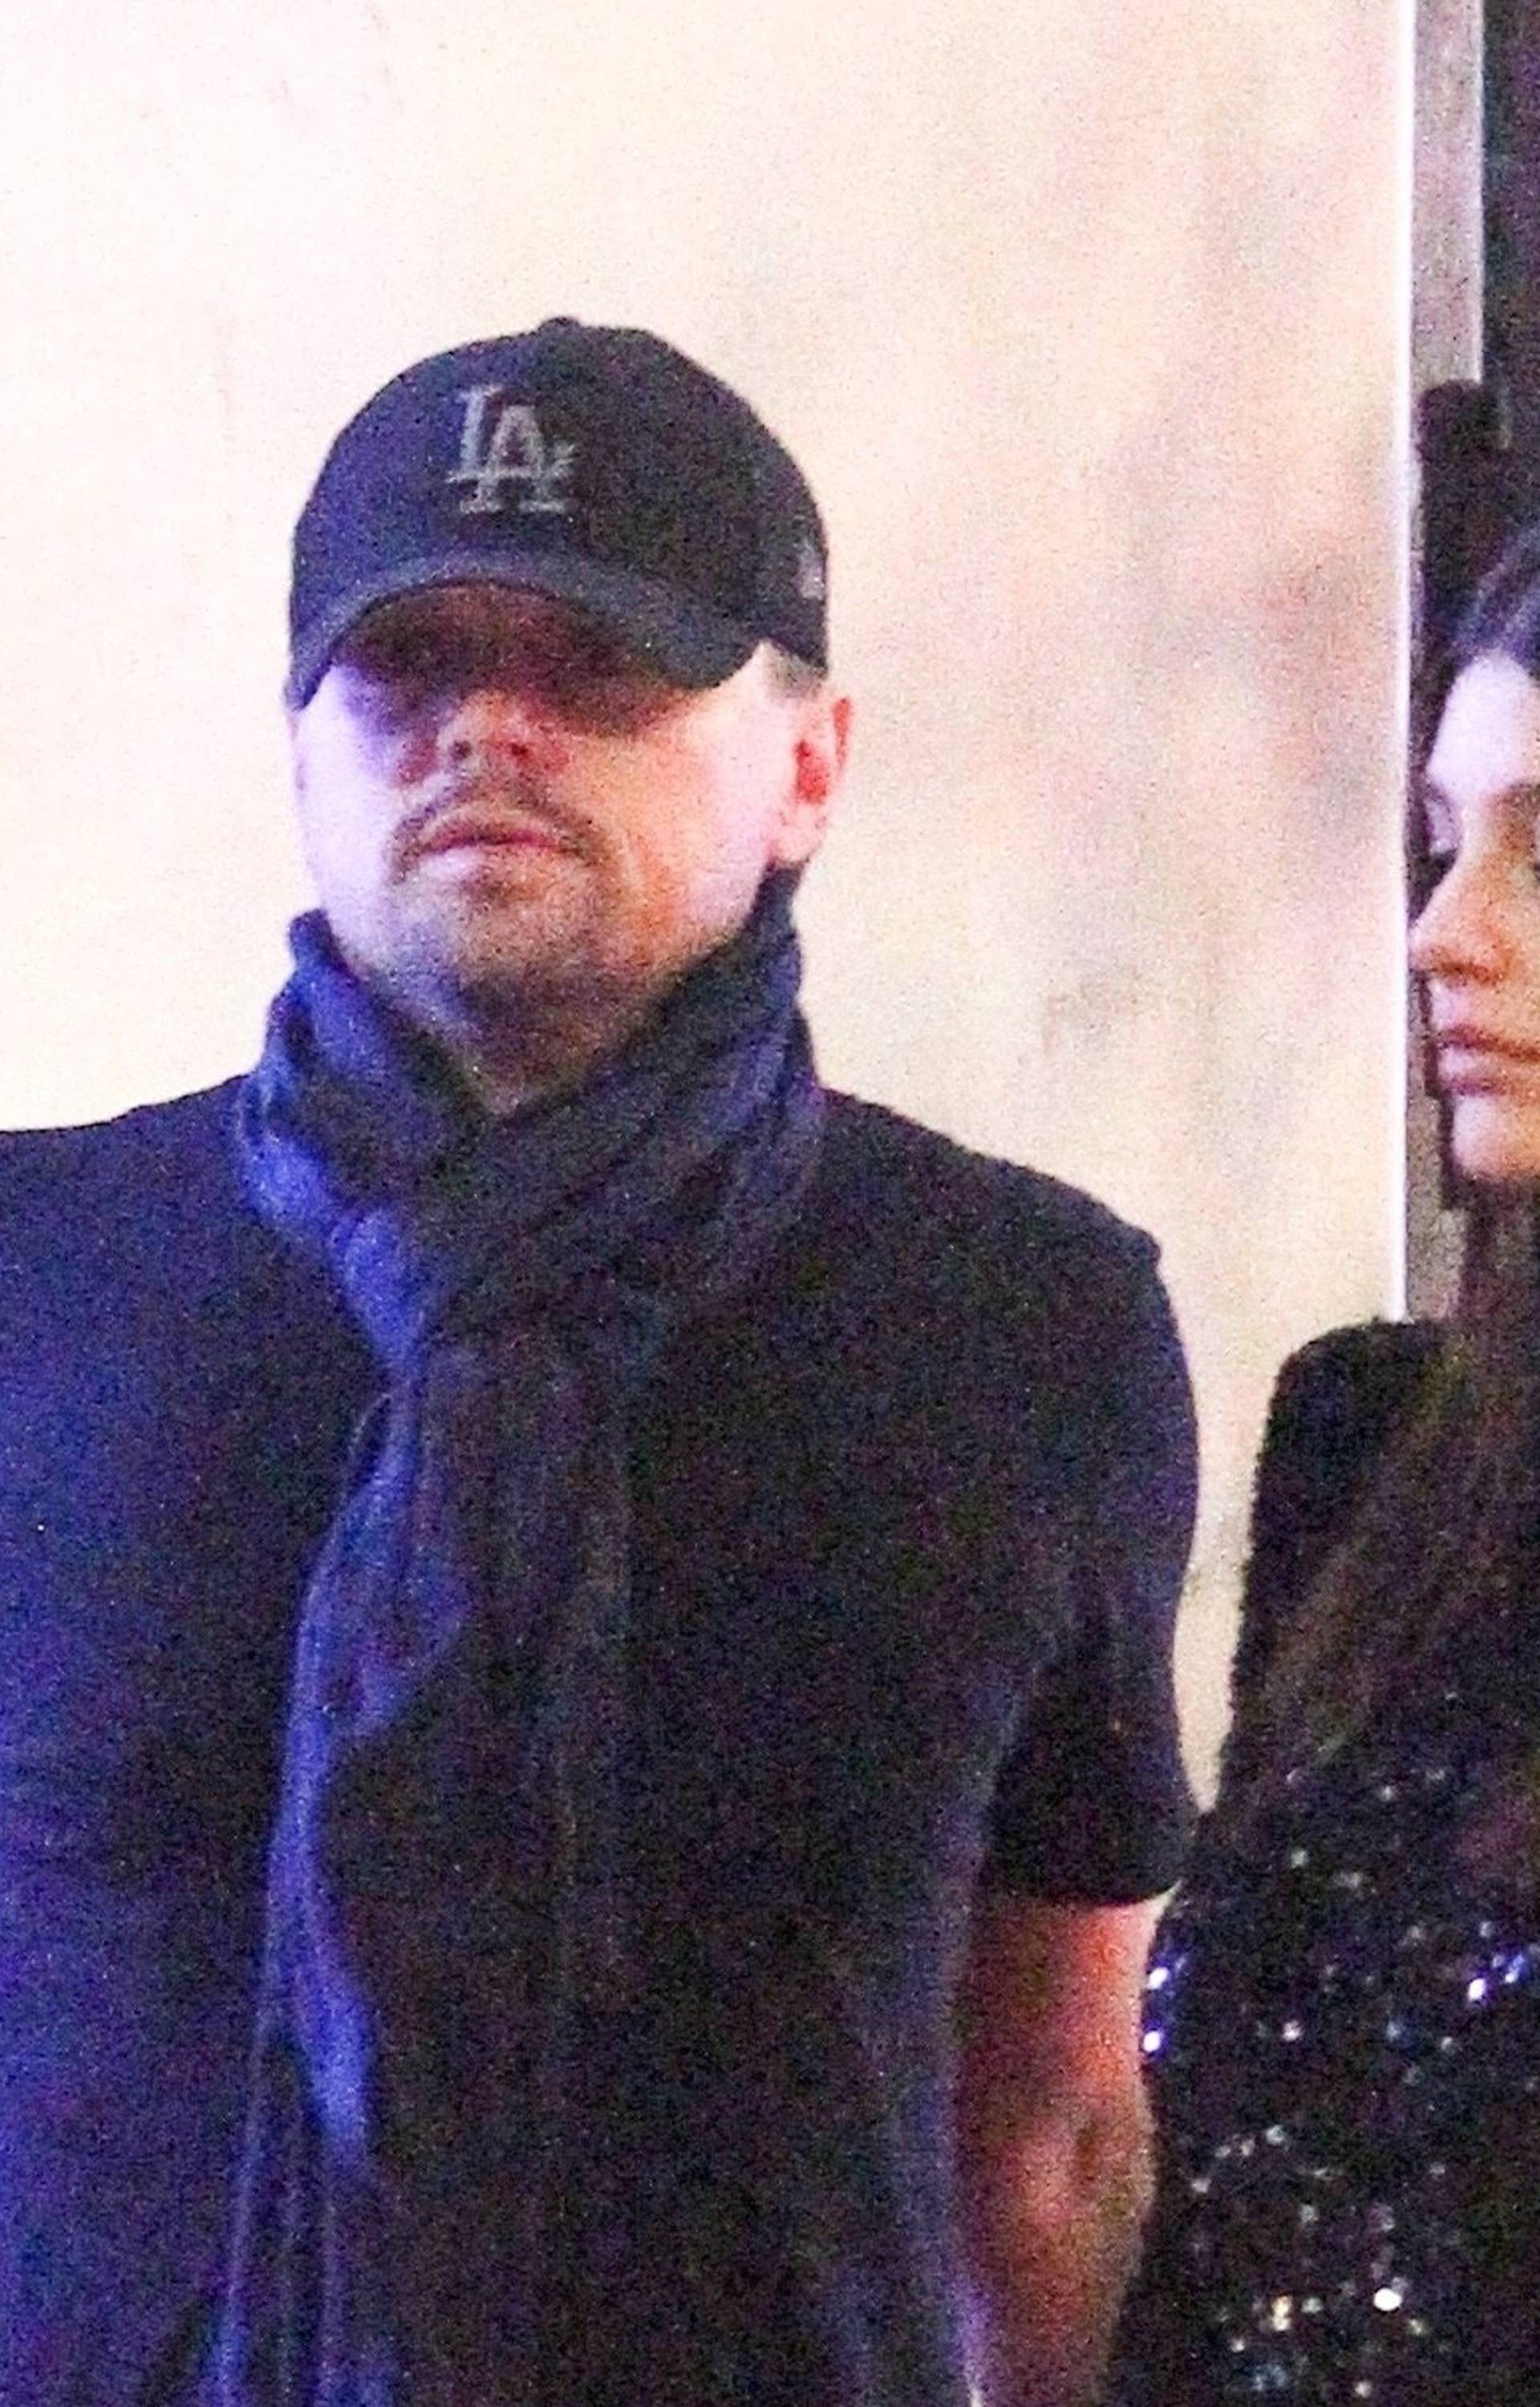 *EXCLUSIVE* Leonardo Dicaprio and girlfriend Camila Morrone enjoy a star studded party at Seth MacFarlane's